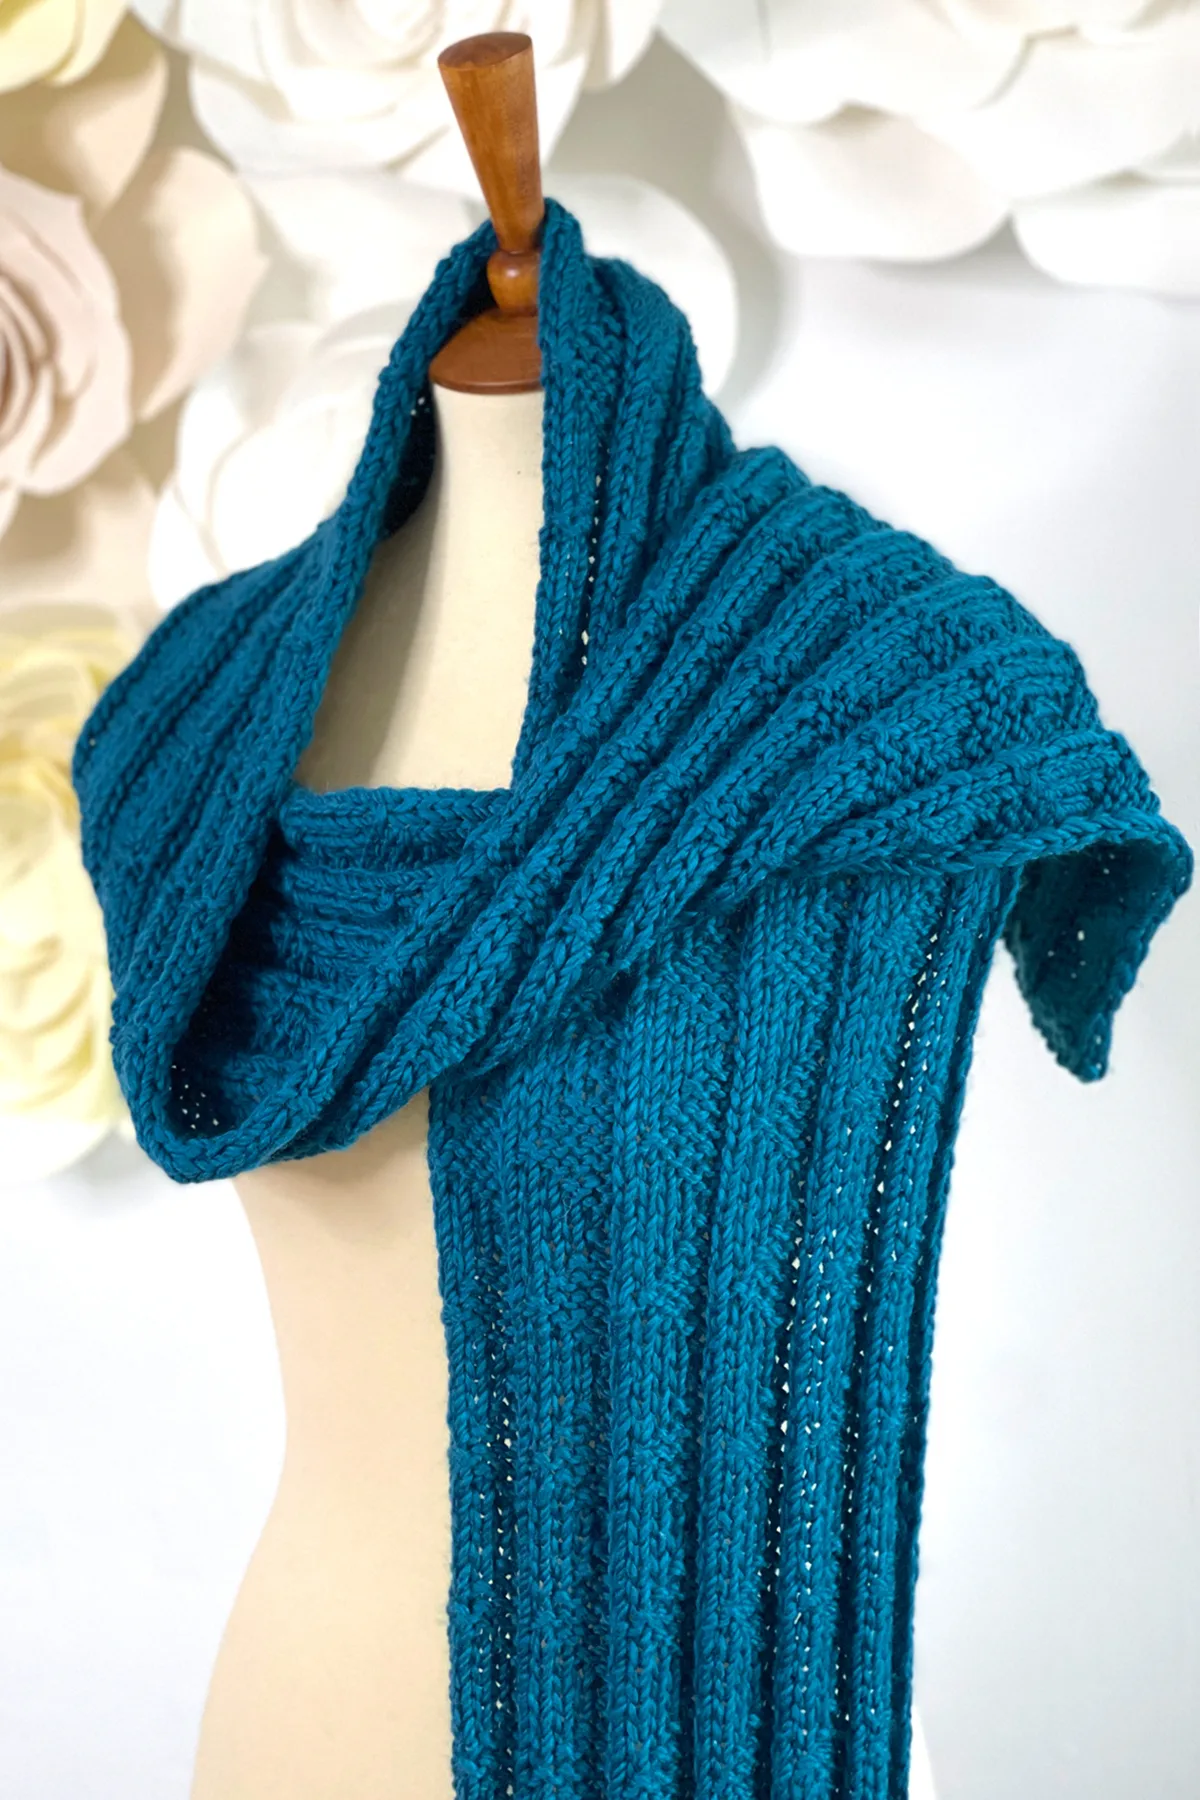 Knitted Pennant Pleating designed by Studio Knit scarf wrapped on mannequin in blue color yarn.